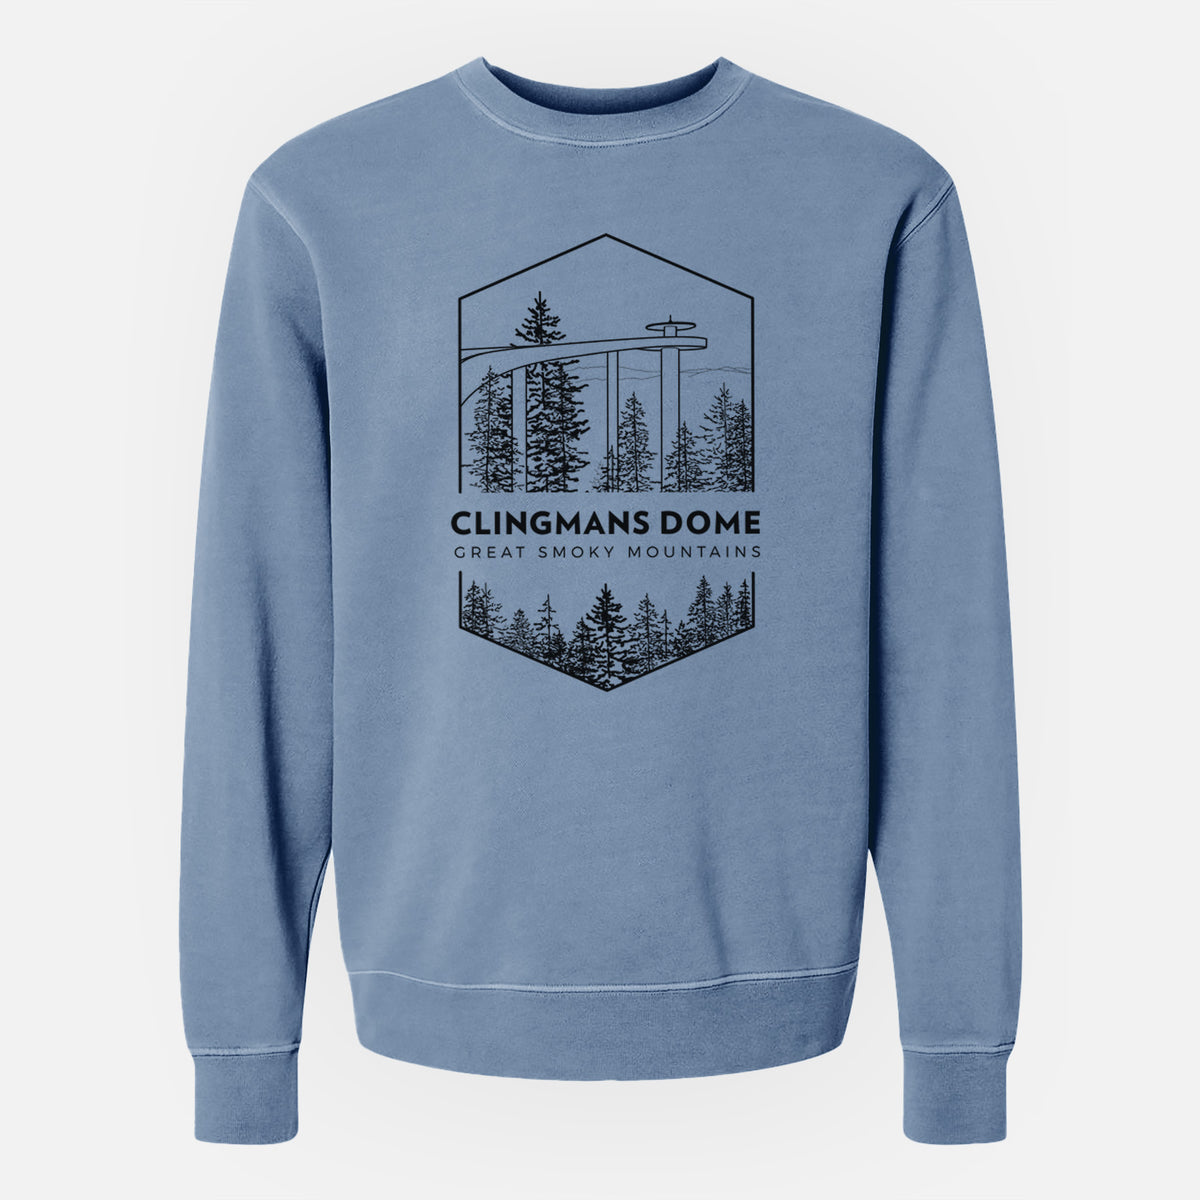 Clingmans Dome - Great Smoky Mountains National Park - Unisex Pigment Dyed Crew Sweatshirt